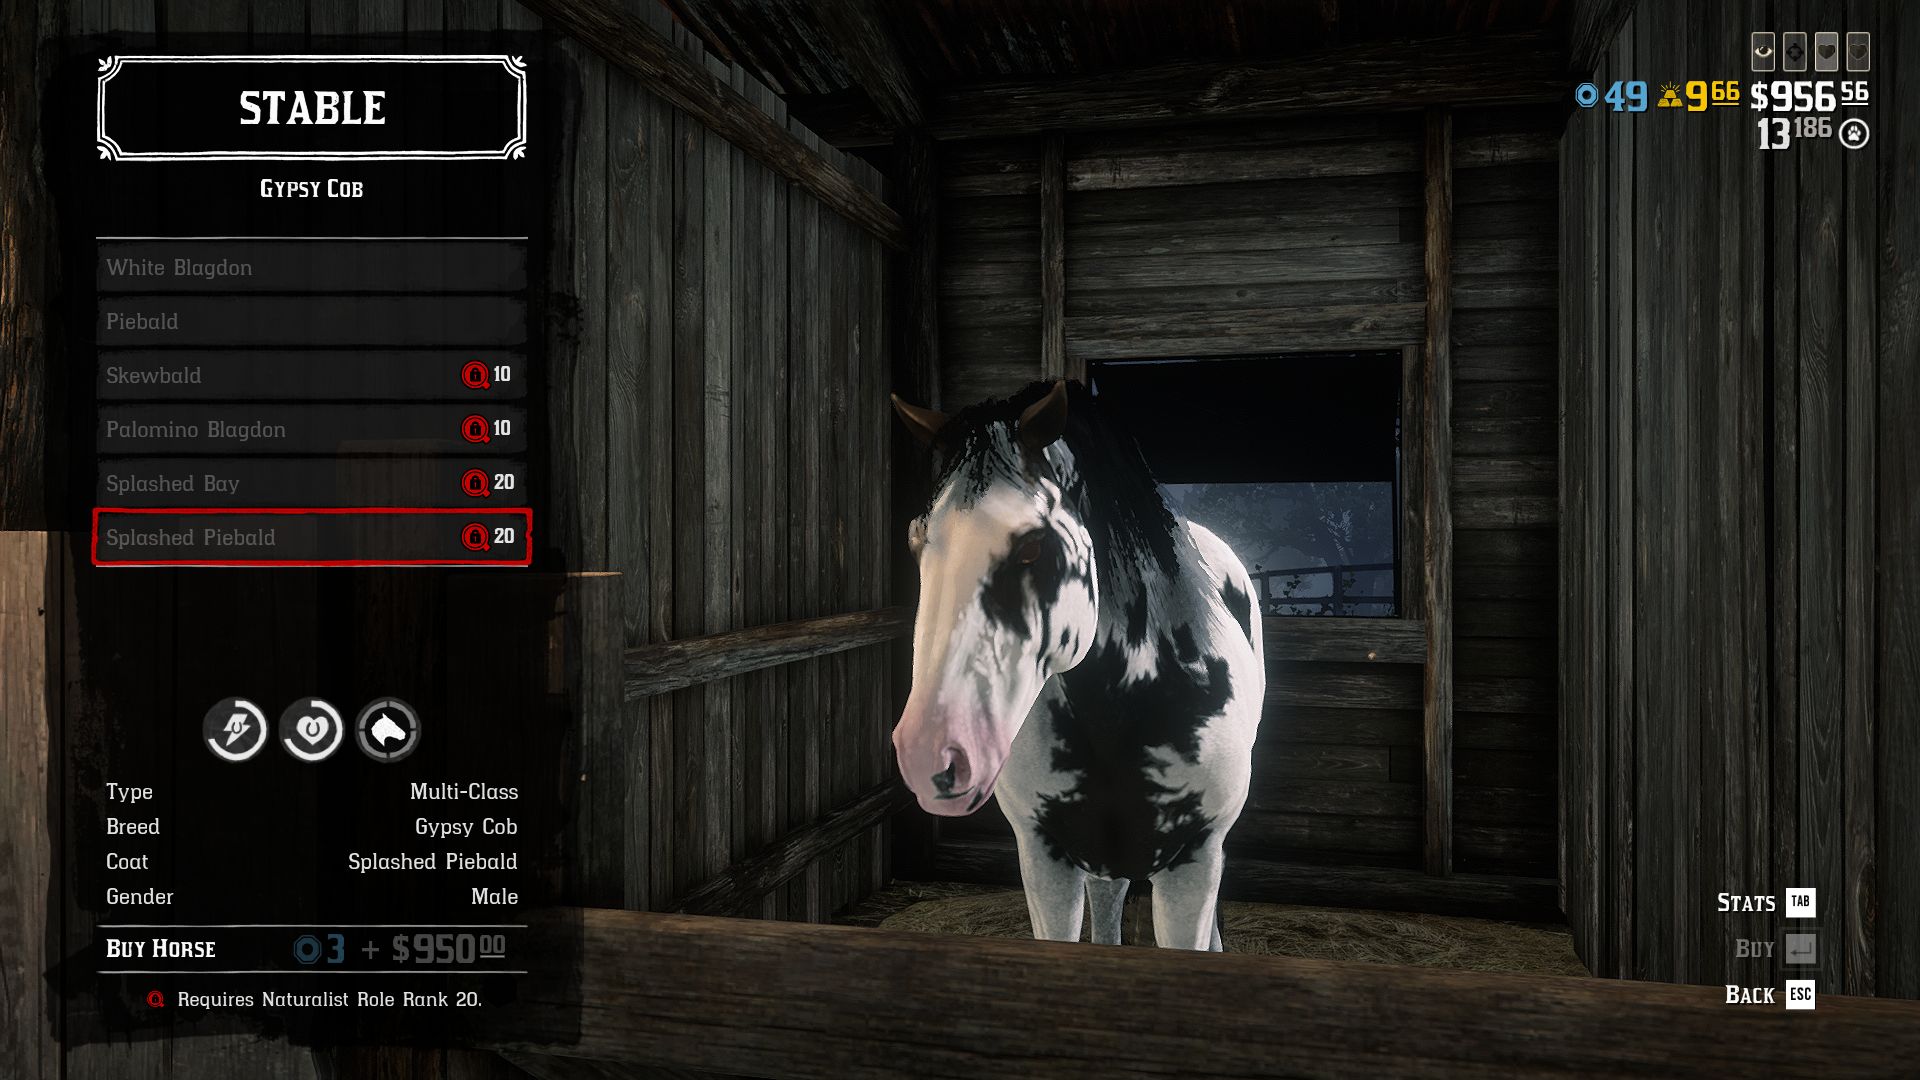 bjærgning violinist system Red Dead Online Gypsy Cob Horse: How to unlock and use the new Naturalist  Update horse | GamesRadar+